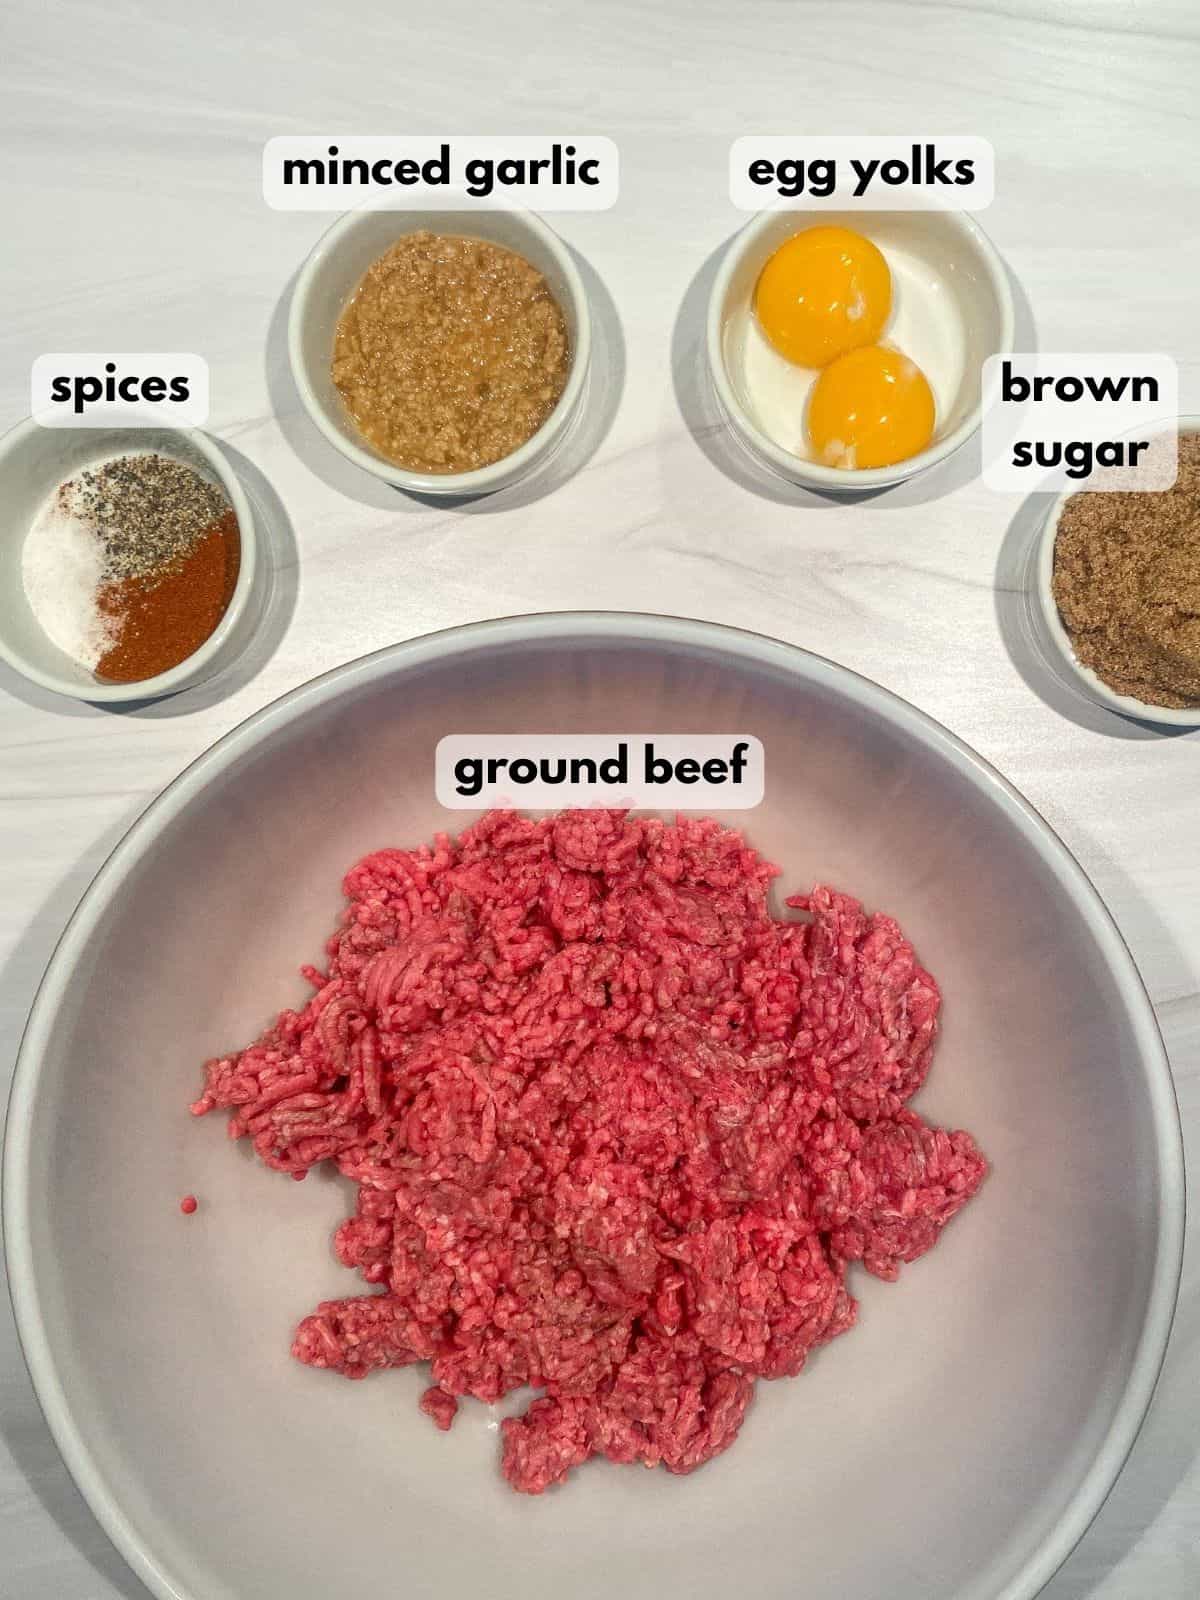 Ingredients for the best burger recipe: ground beef, egg yolks, spices, garlic, and brown sugar.